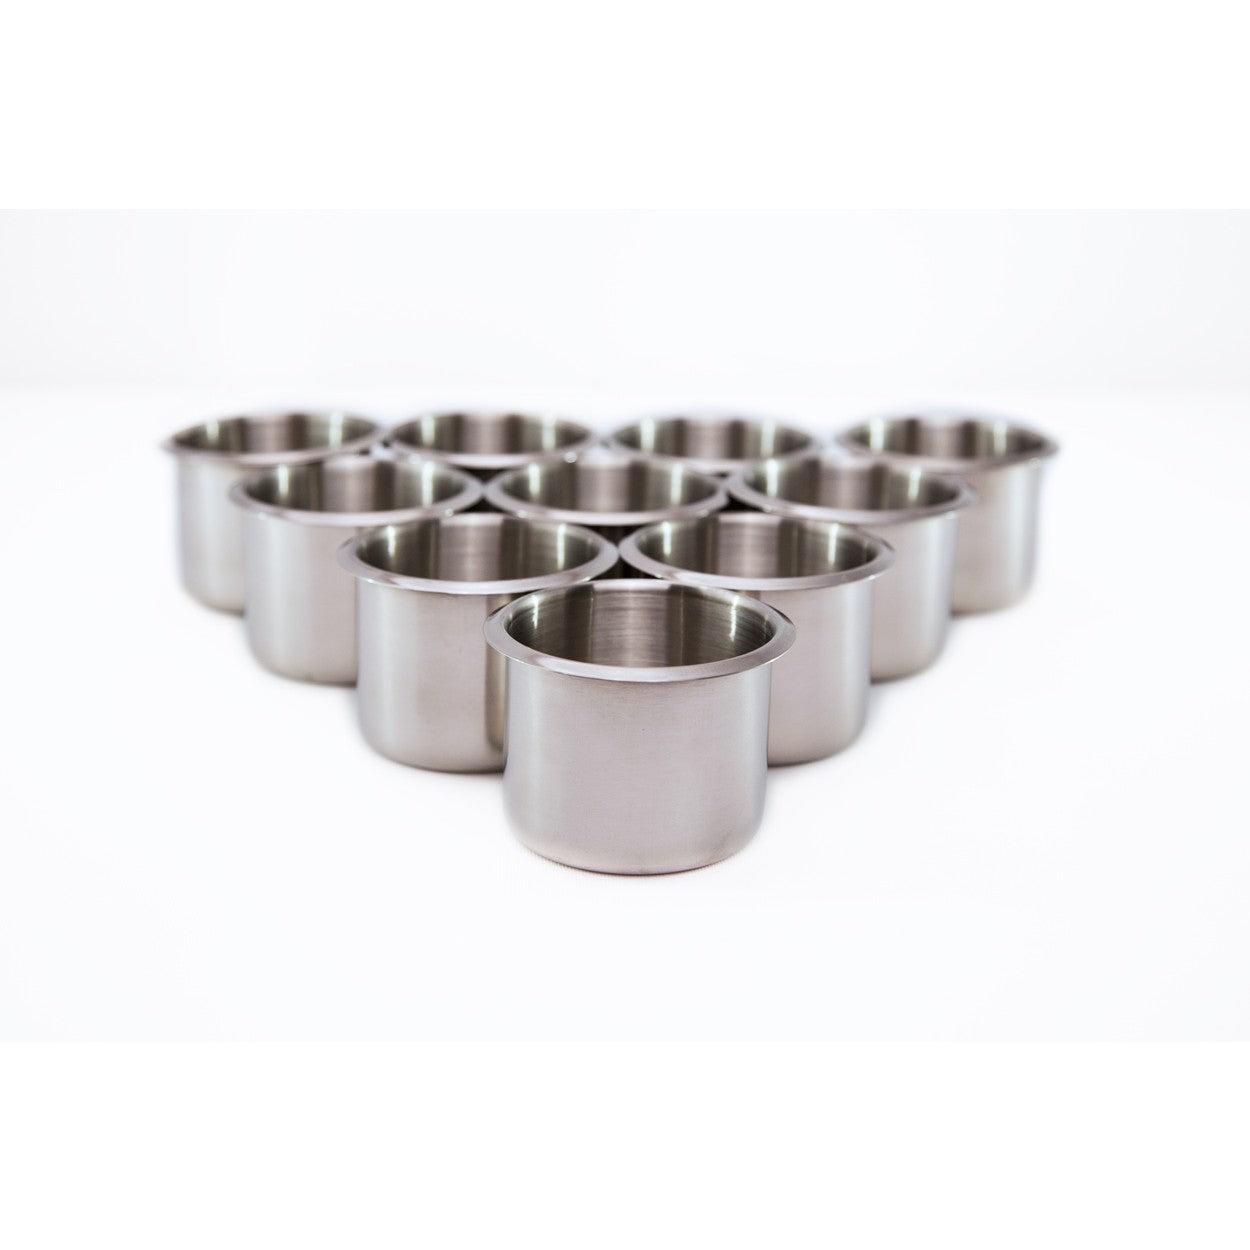 BBO Poker Tables 4 Inch Cup Holders for Poker Table